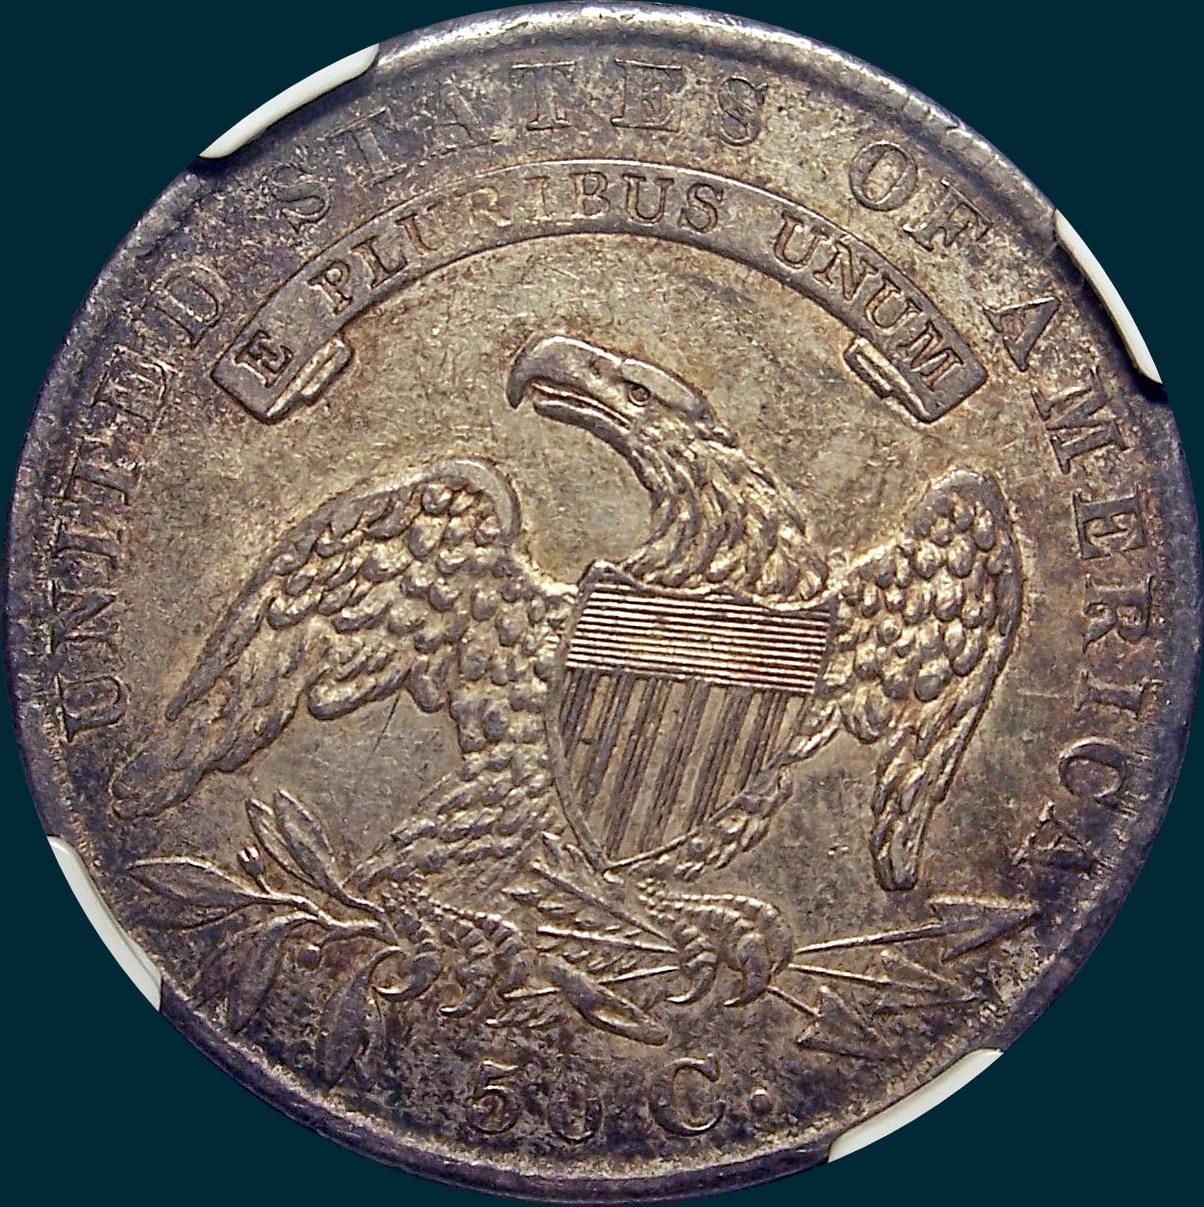 1834, O-117, Small Date, Small Letters, Capped Bust, Half Dollar